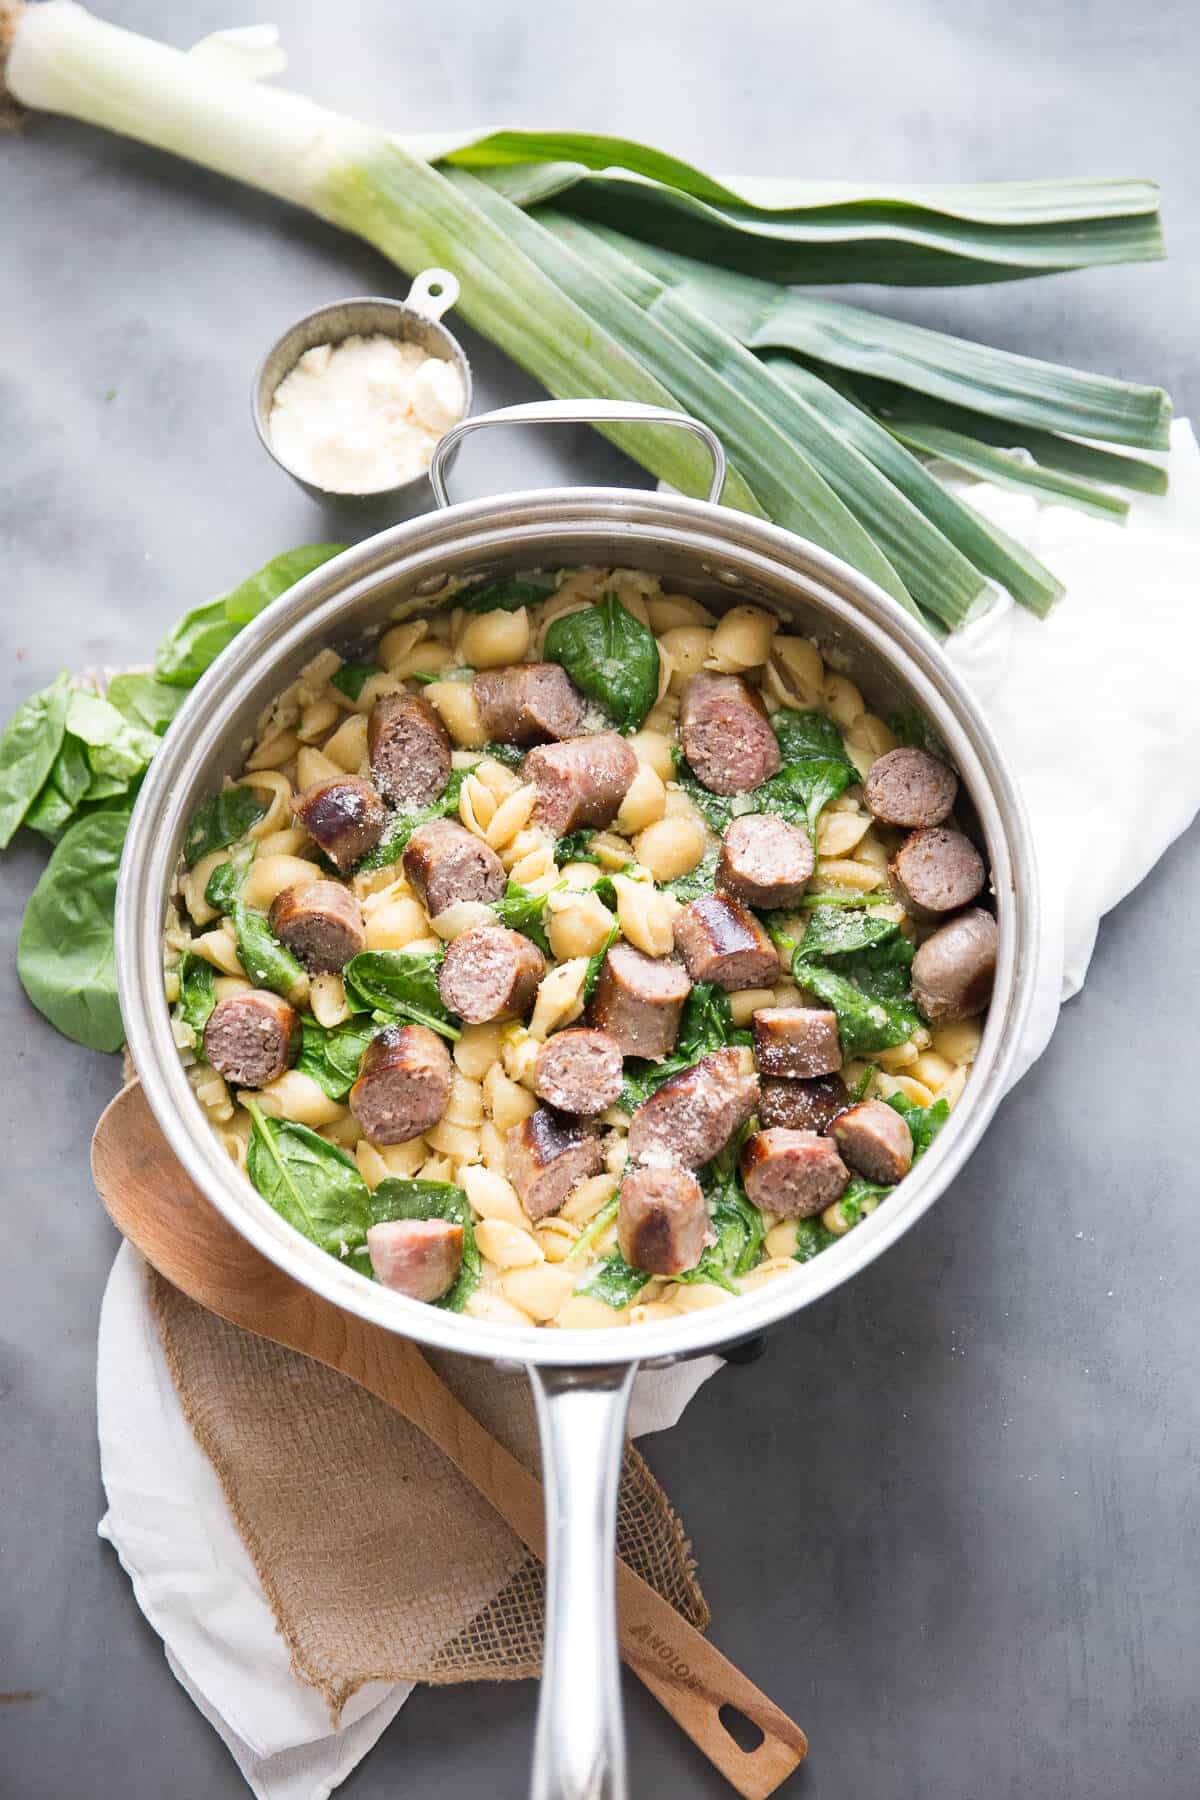 This light and creamy sausage pasta is luscious and flavorful. The spinach and leeks add color and freshness to this no-fuss recipe.  This is a great meal for busy nights!'